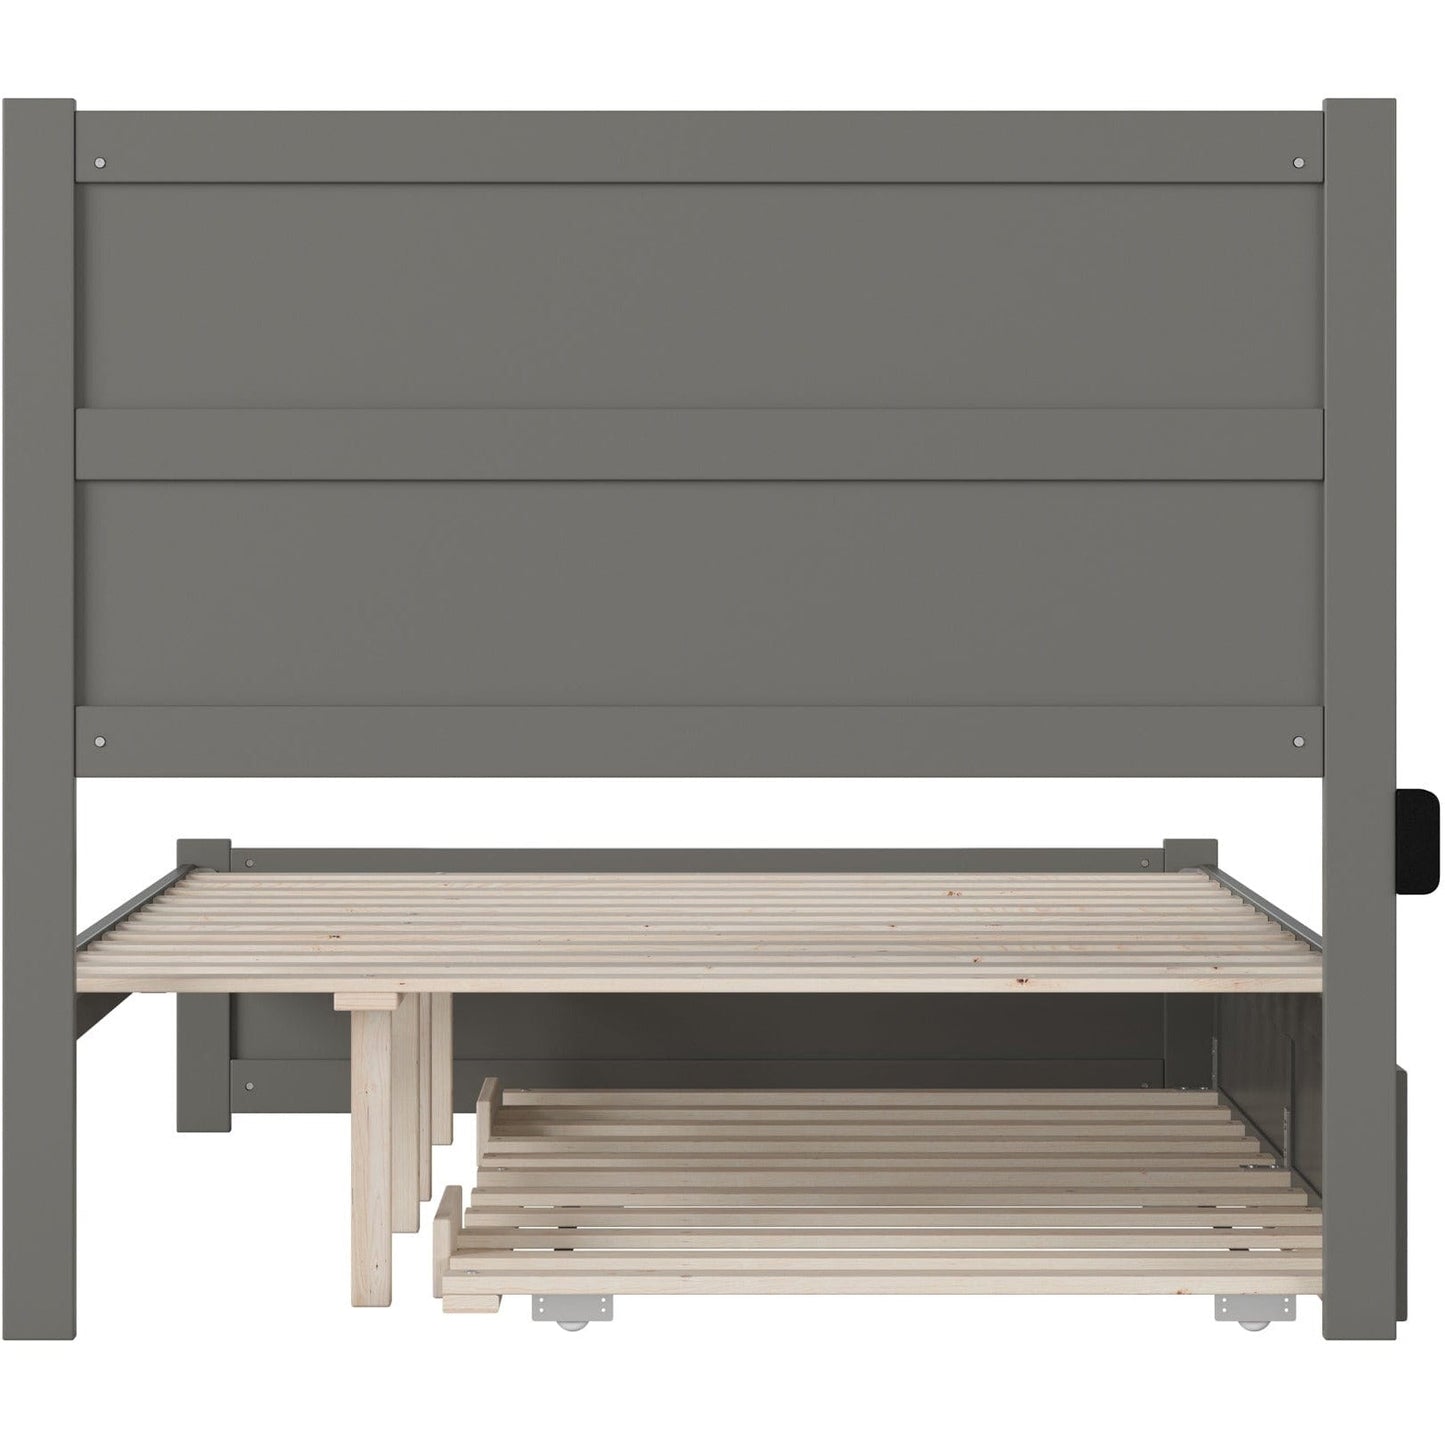 AFI Furnishings NoHo Full Bed with Footboard and Twin Trundle in Grey AG9161239